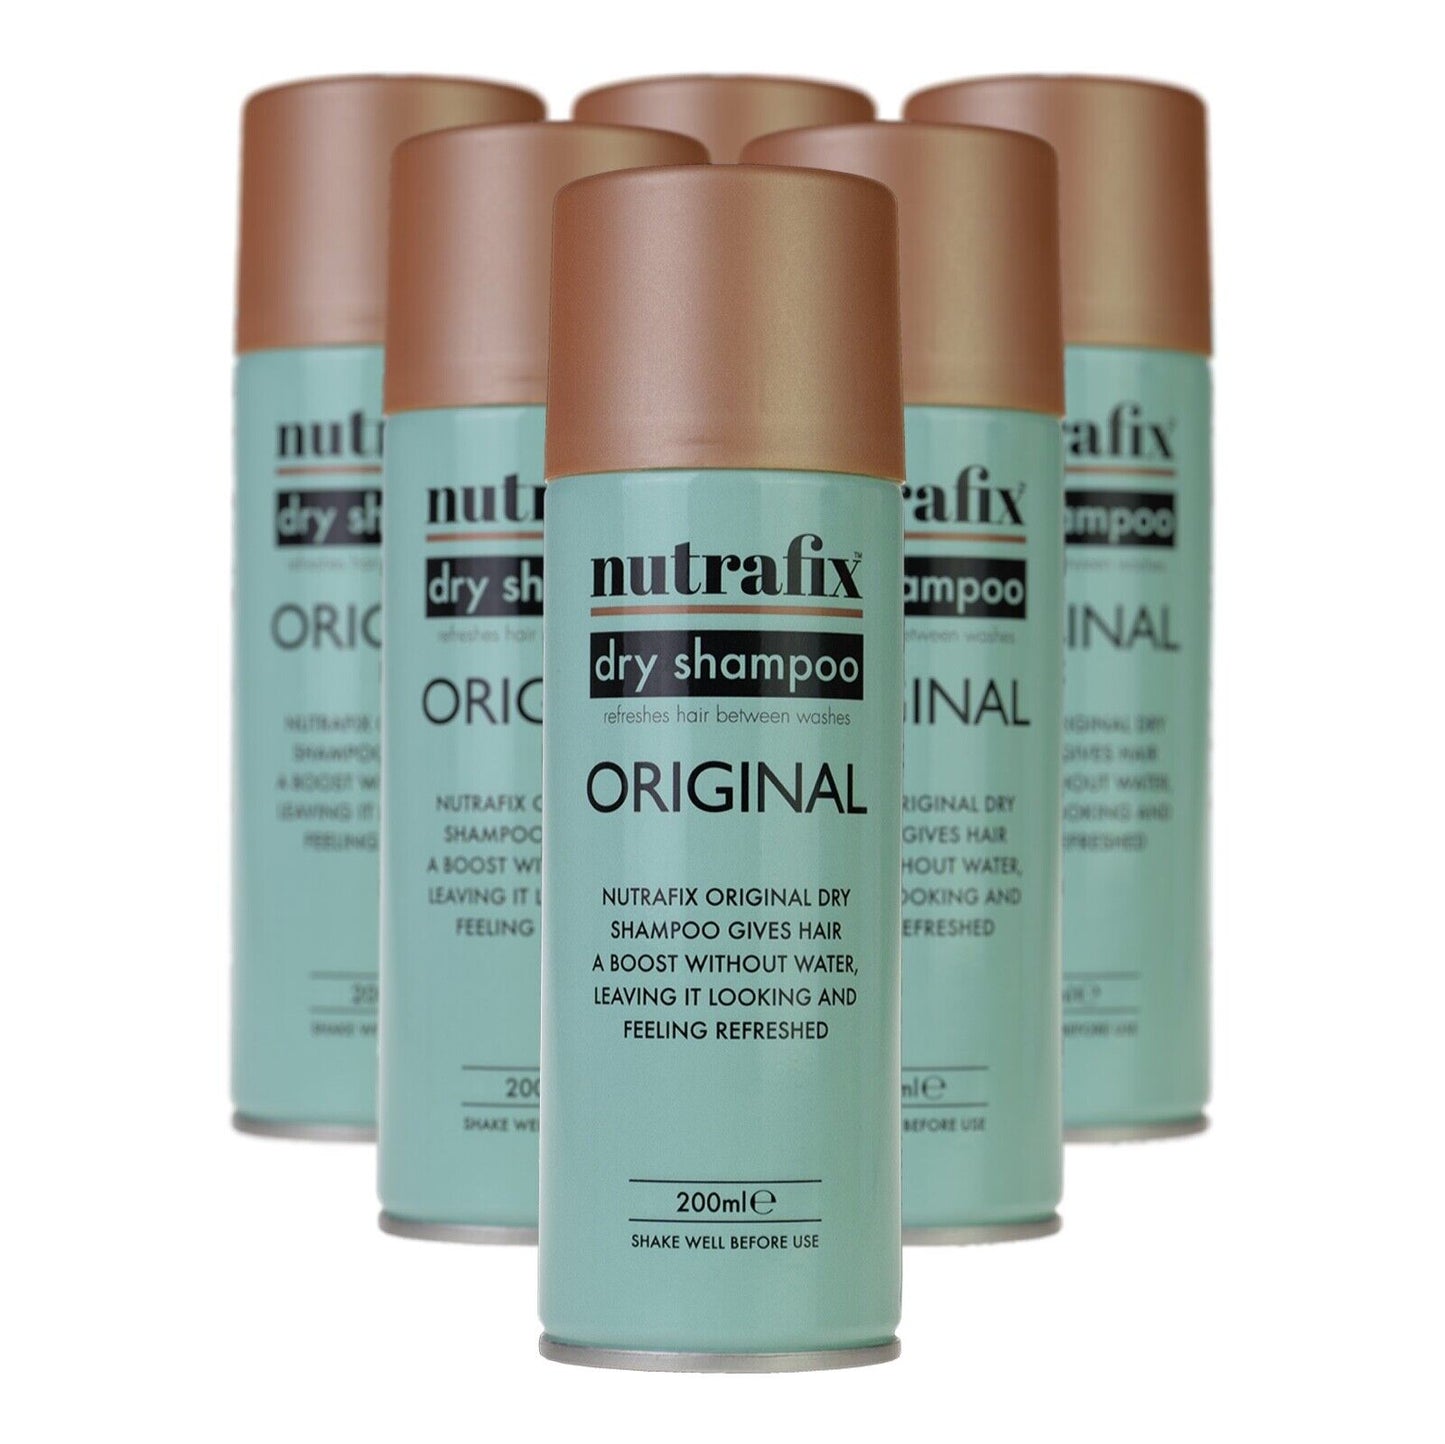 6x Nutrafix Original Dry Shampoo 200ml Hair Refresh Boost Without Water